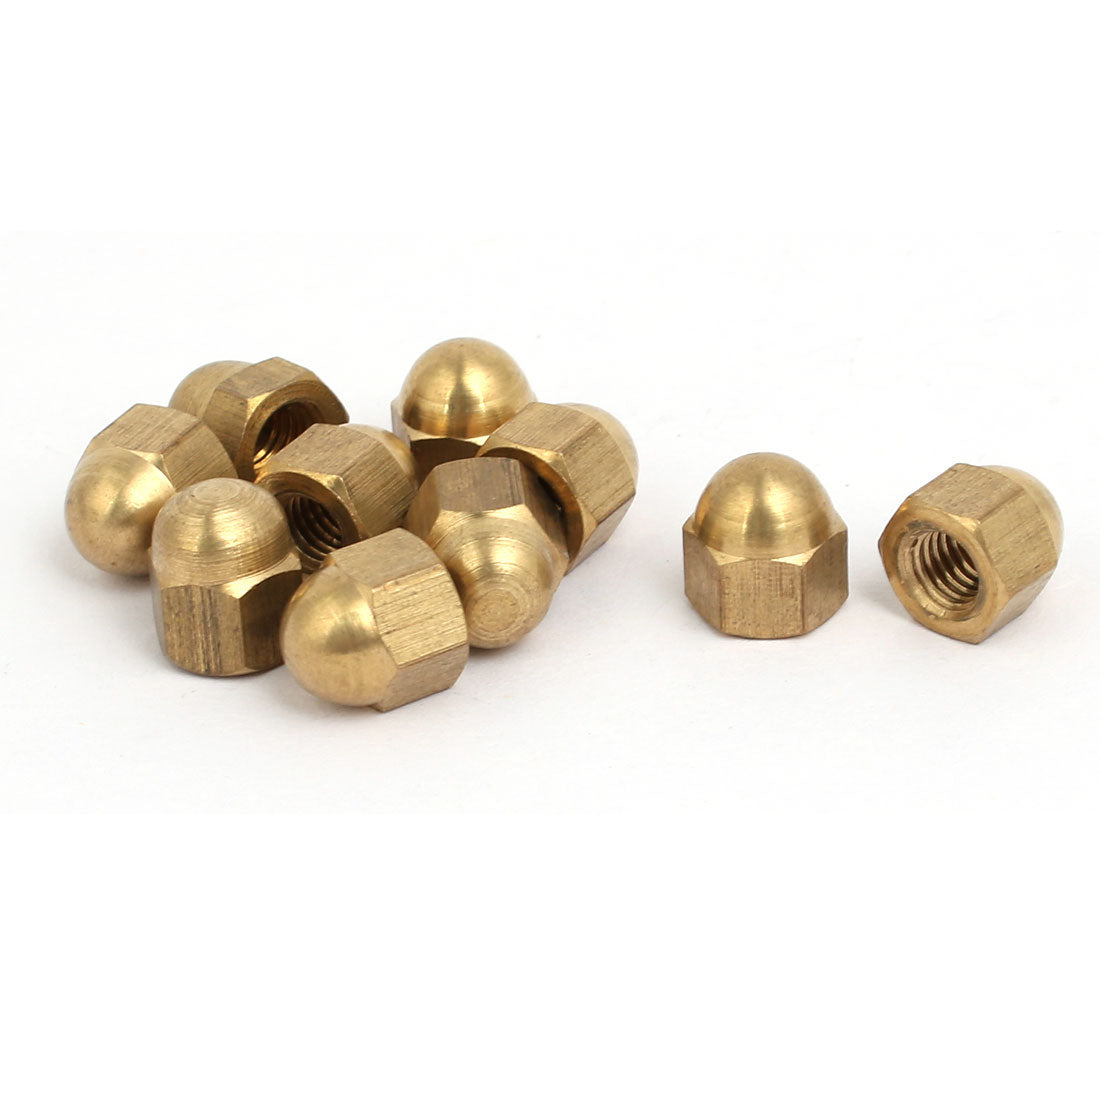 uxcell Uxcell 10pcs M5 Female Thread Nut DIN1587 Dome Cap Head Hex Brass Tone